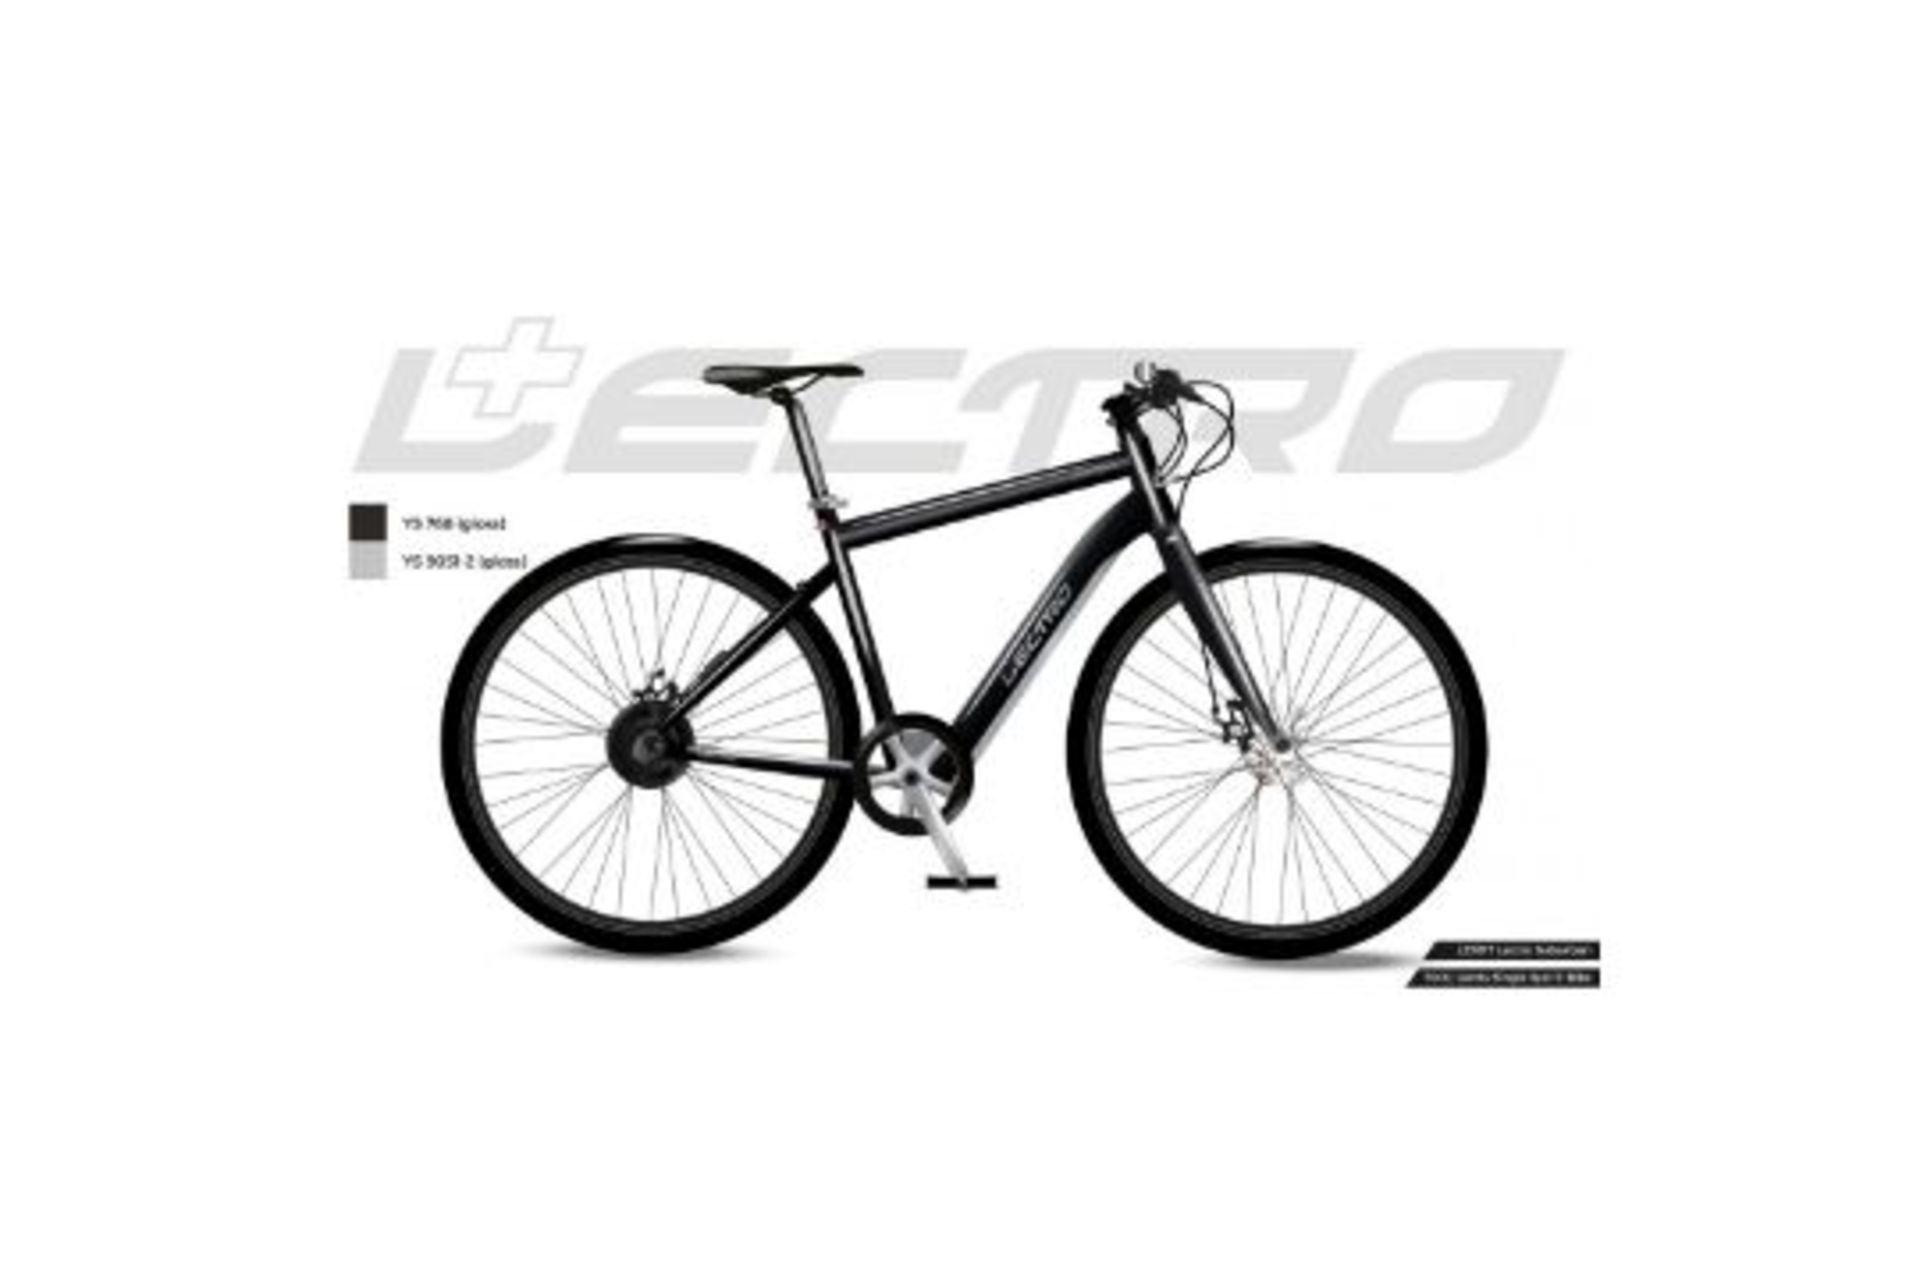 Pallet to contain 8 x New Boxed Lectro Suburban Gents 36V 700c Wheel Aluminium Electric Bike 18". R